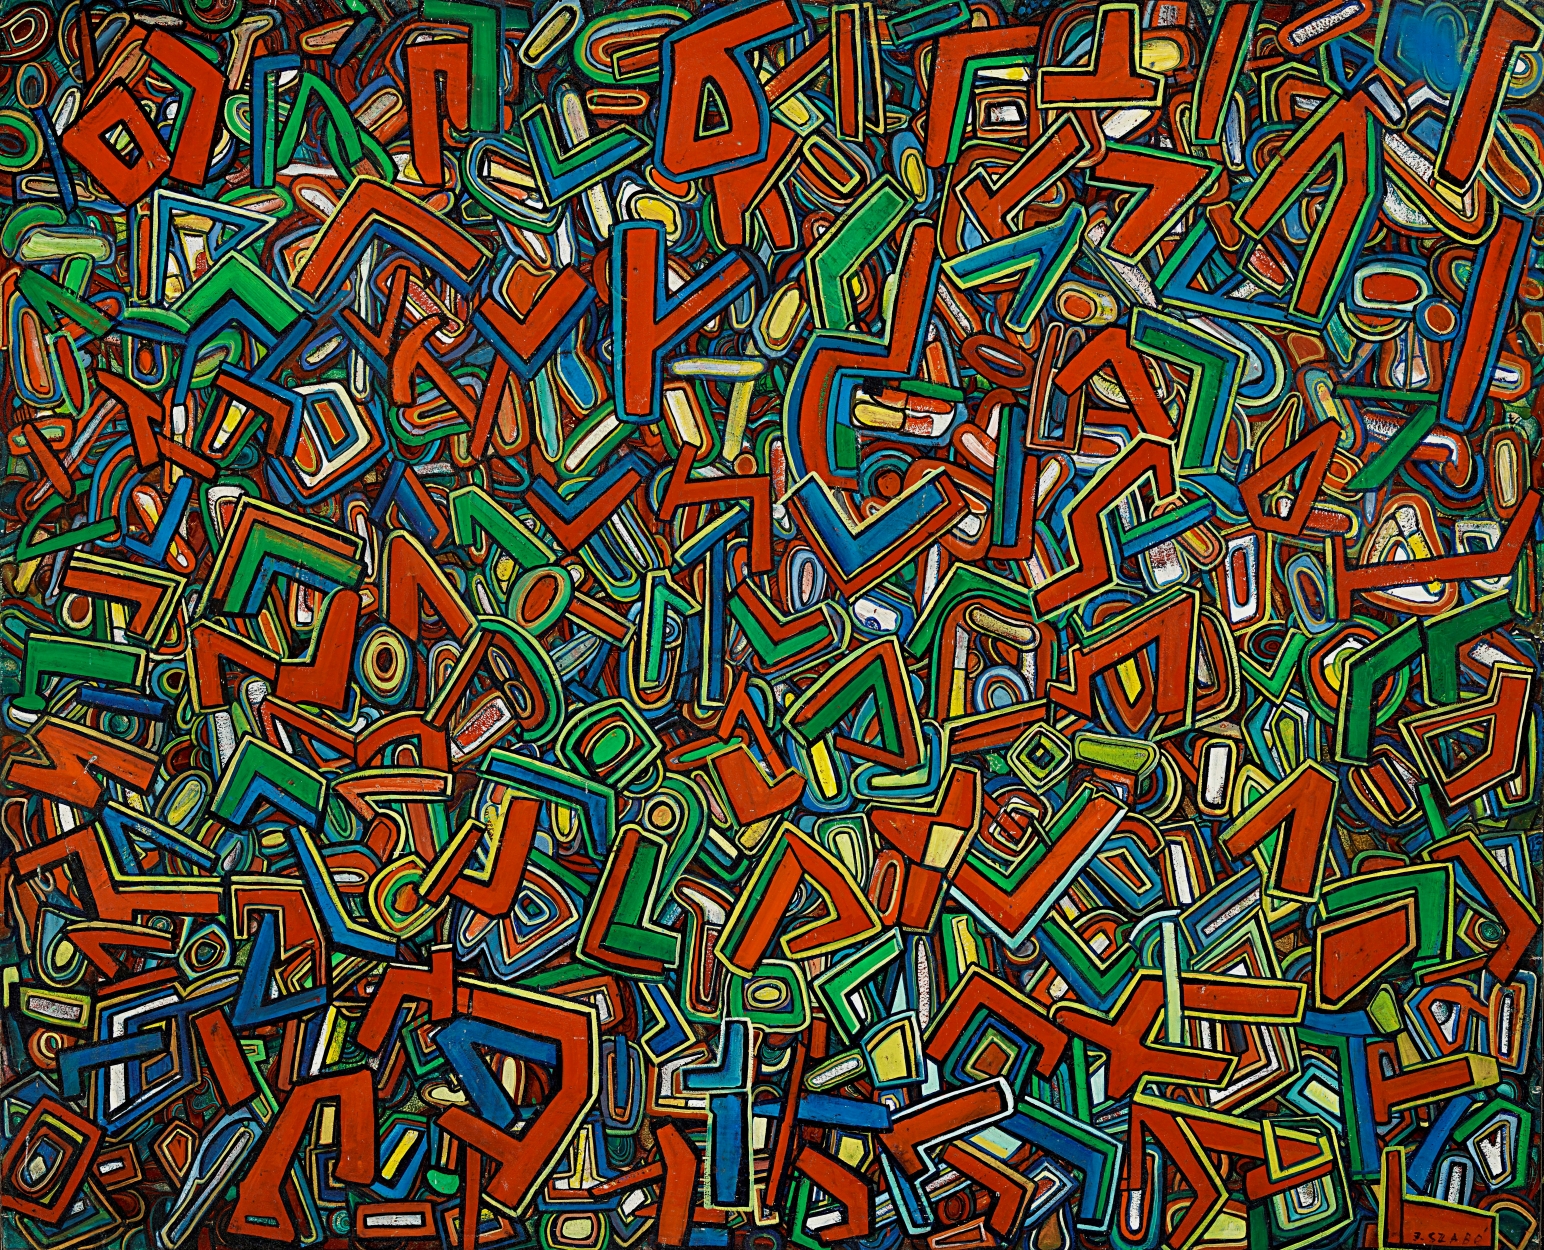 Szabó, Joseph 1925-2010 Composition with Numbers and Letters II., 1986